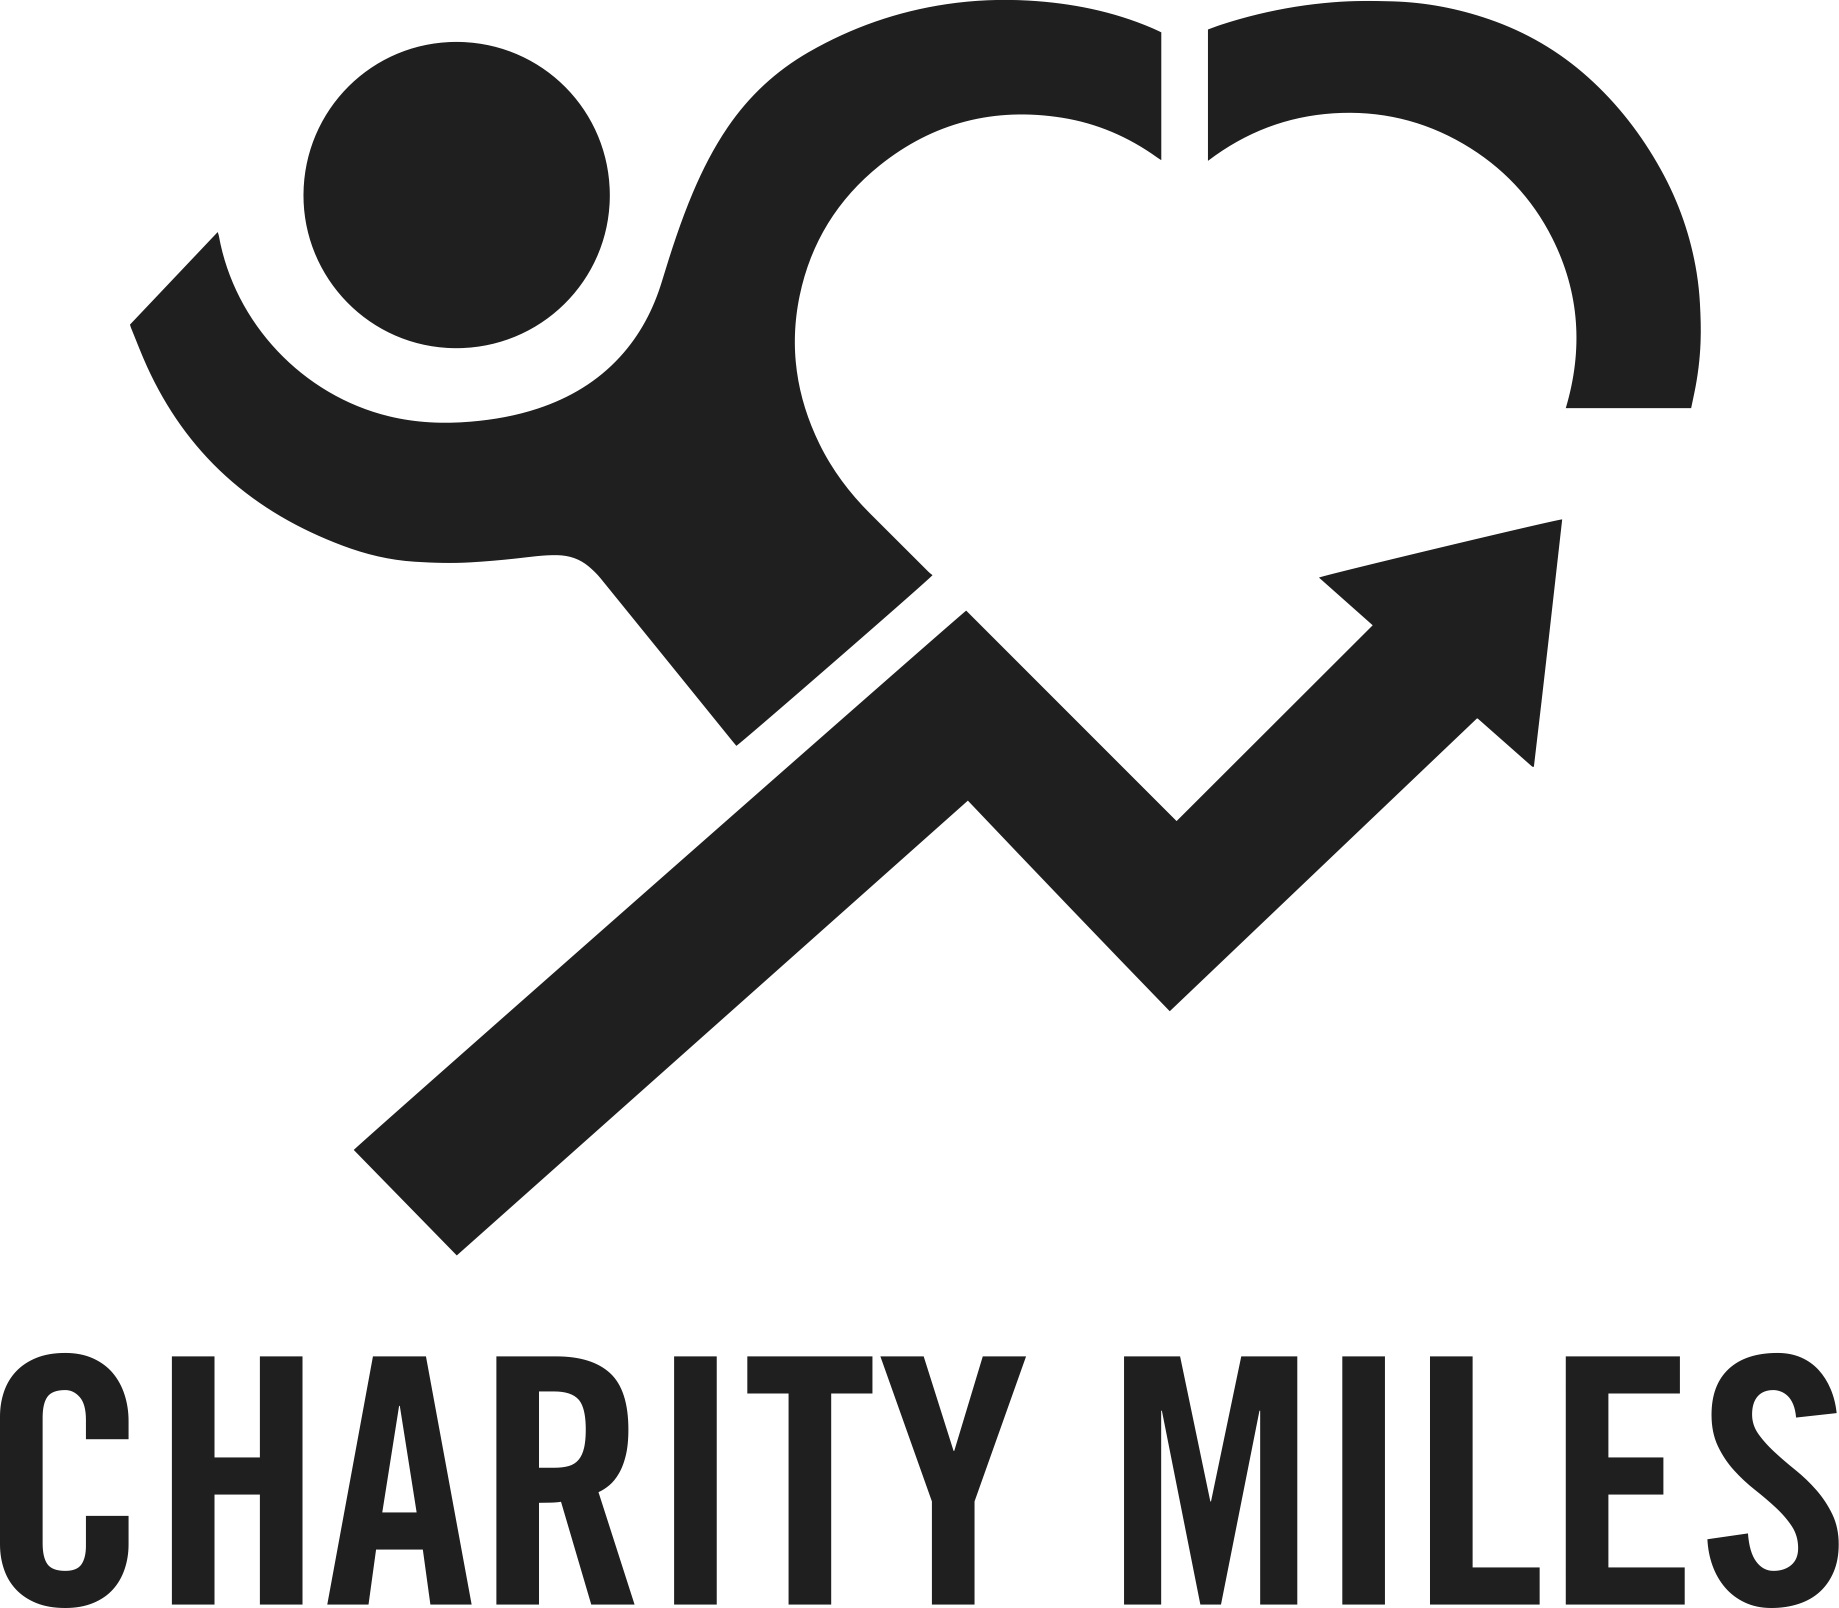 Buycott,Givergy,Charity Miles,Humanity,Utilities,Apps,AppNations,